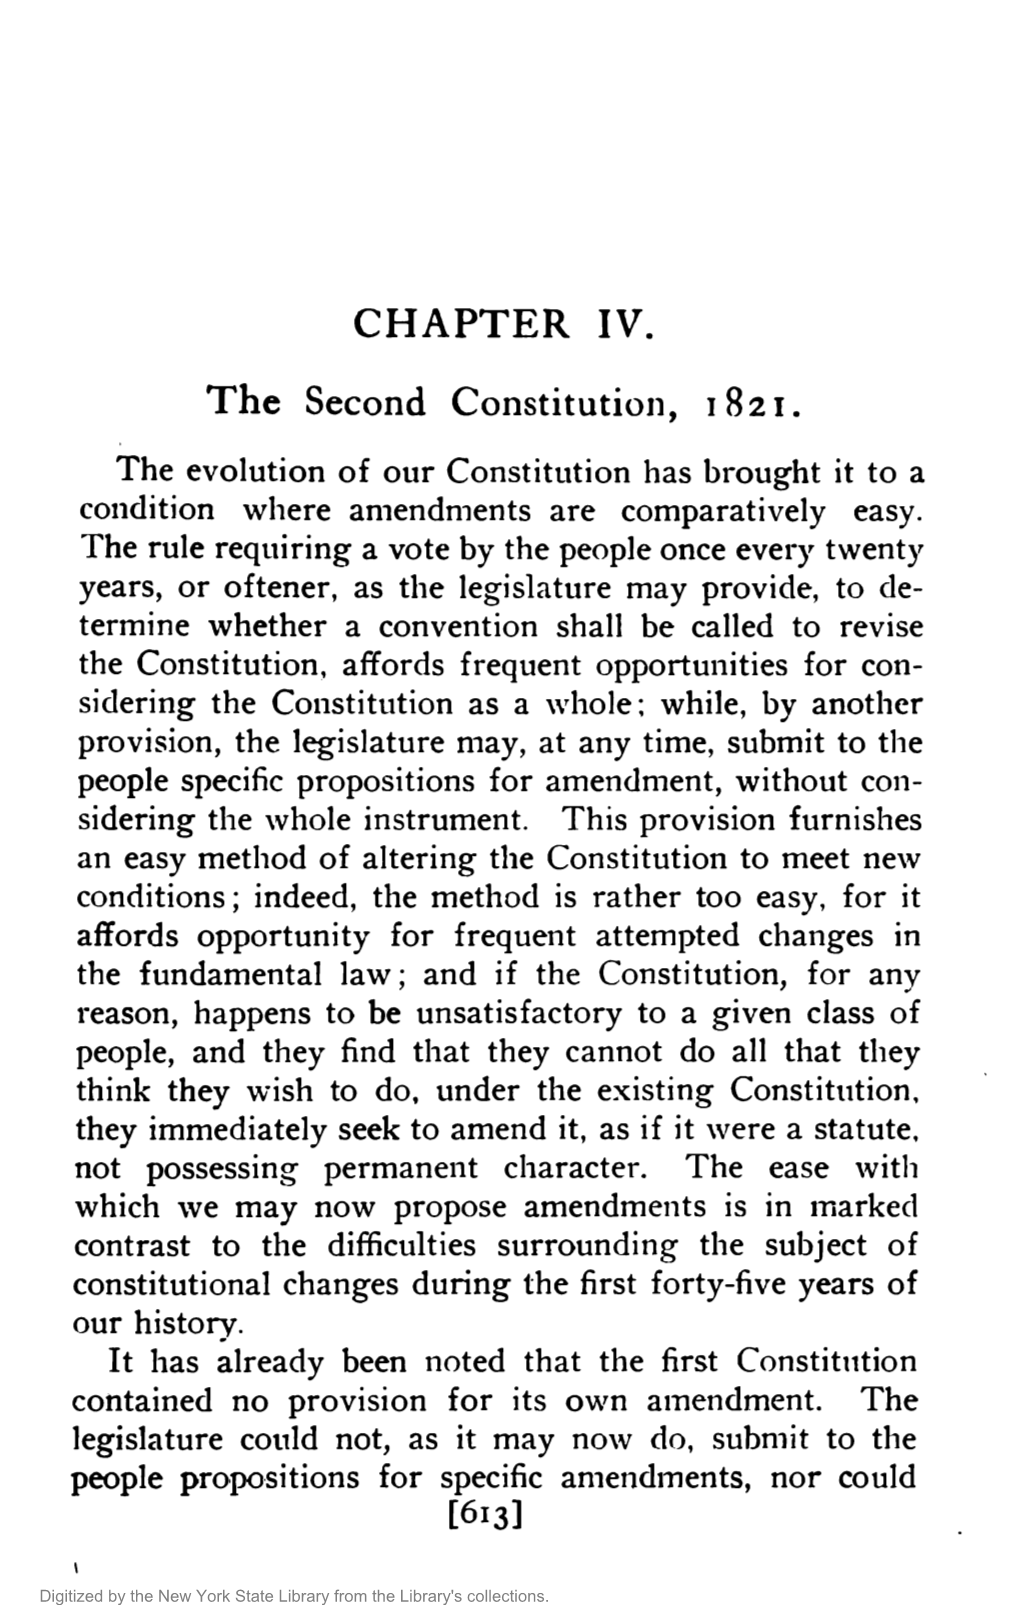 CHAPTER IV. the Second Constitution, 1821